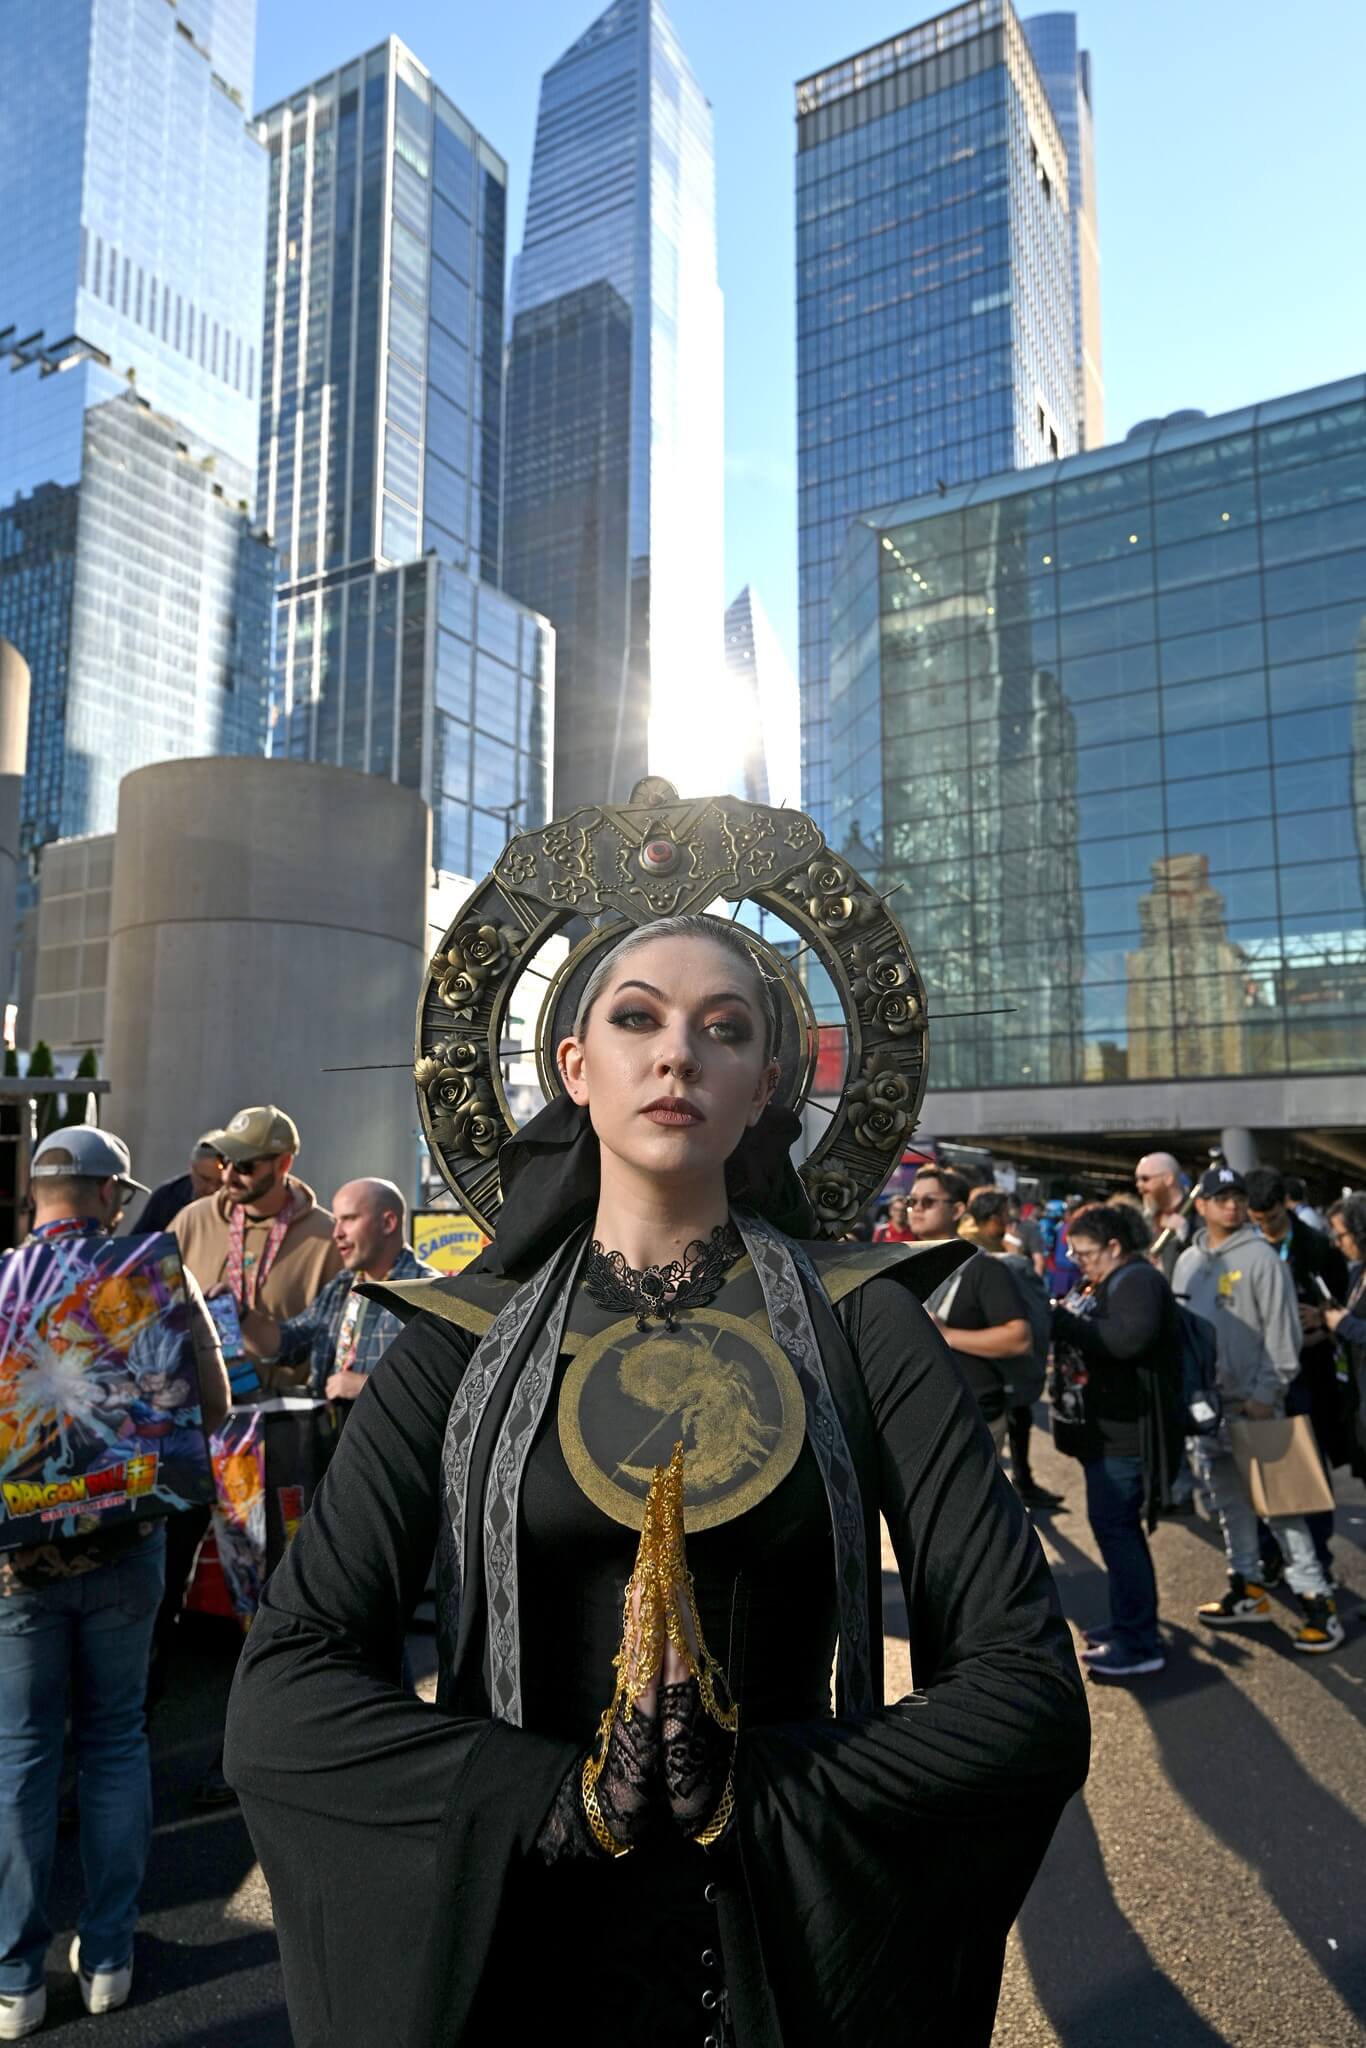 NYCC 2023 Cosplayer outside 2023 2024 Comic Con Dates